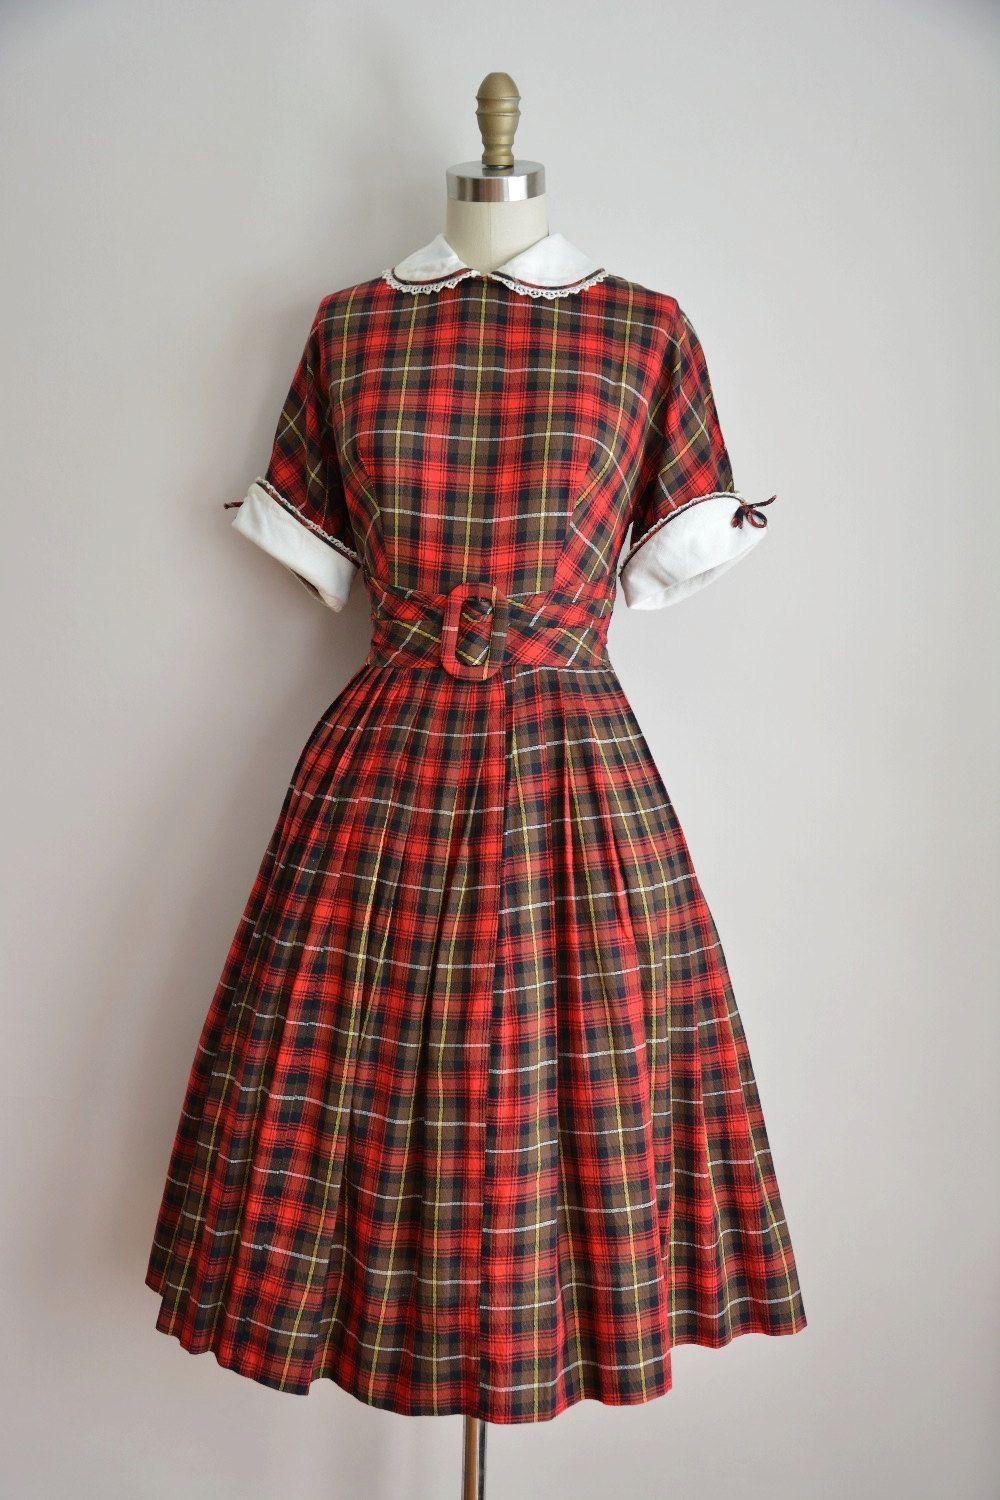 Red and Yellow Peter Pan Logo - Vintage 1950s cotton plaid dress. Brown, red, yellow and white plaid ...